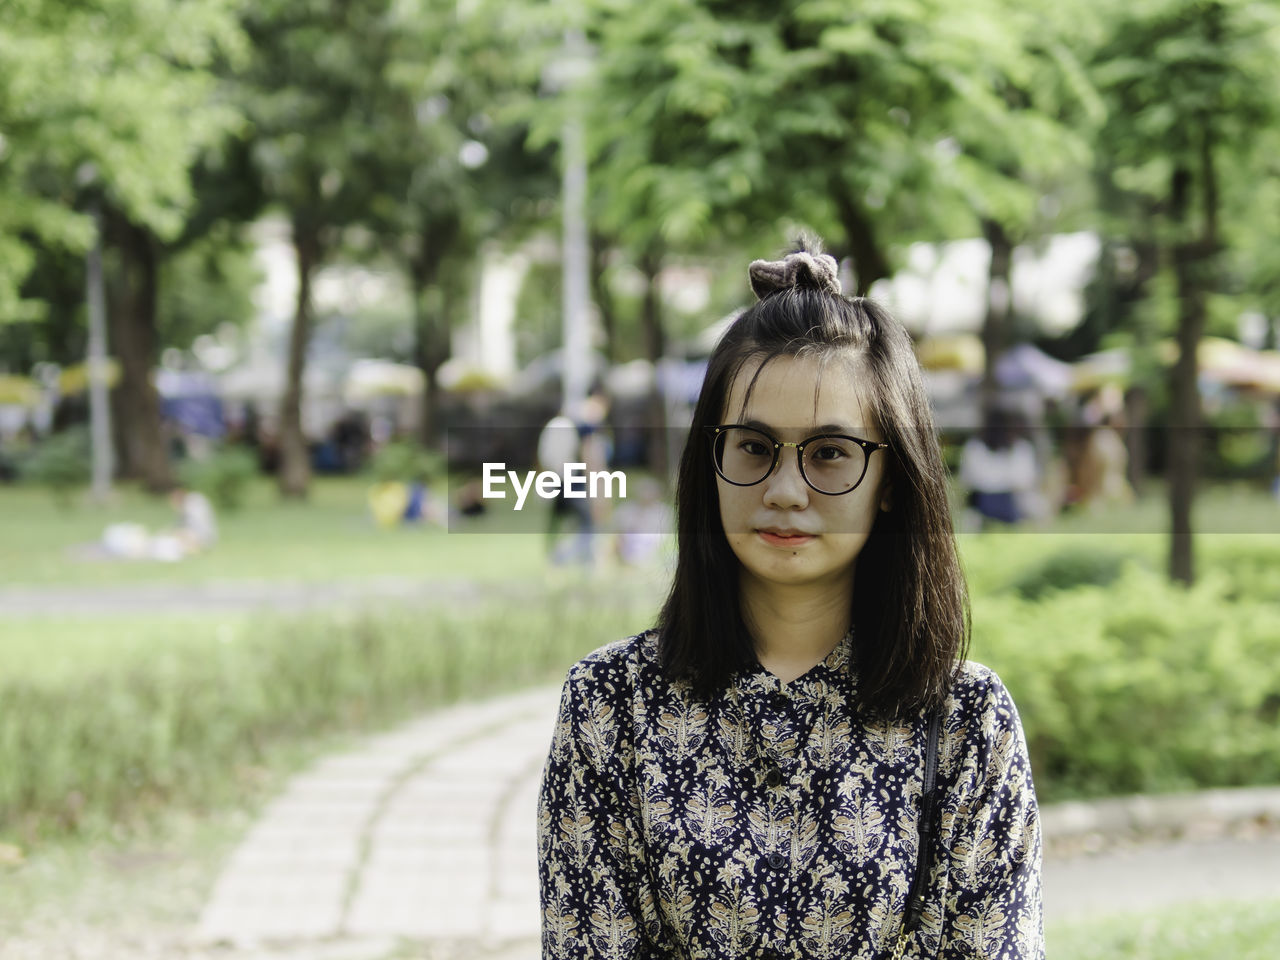 Portrait of young woman in eyeglasses standing outdoors